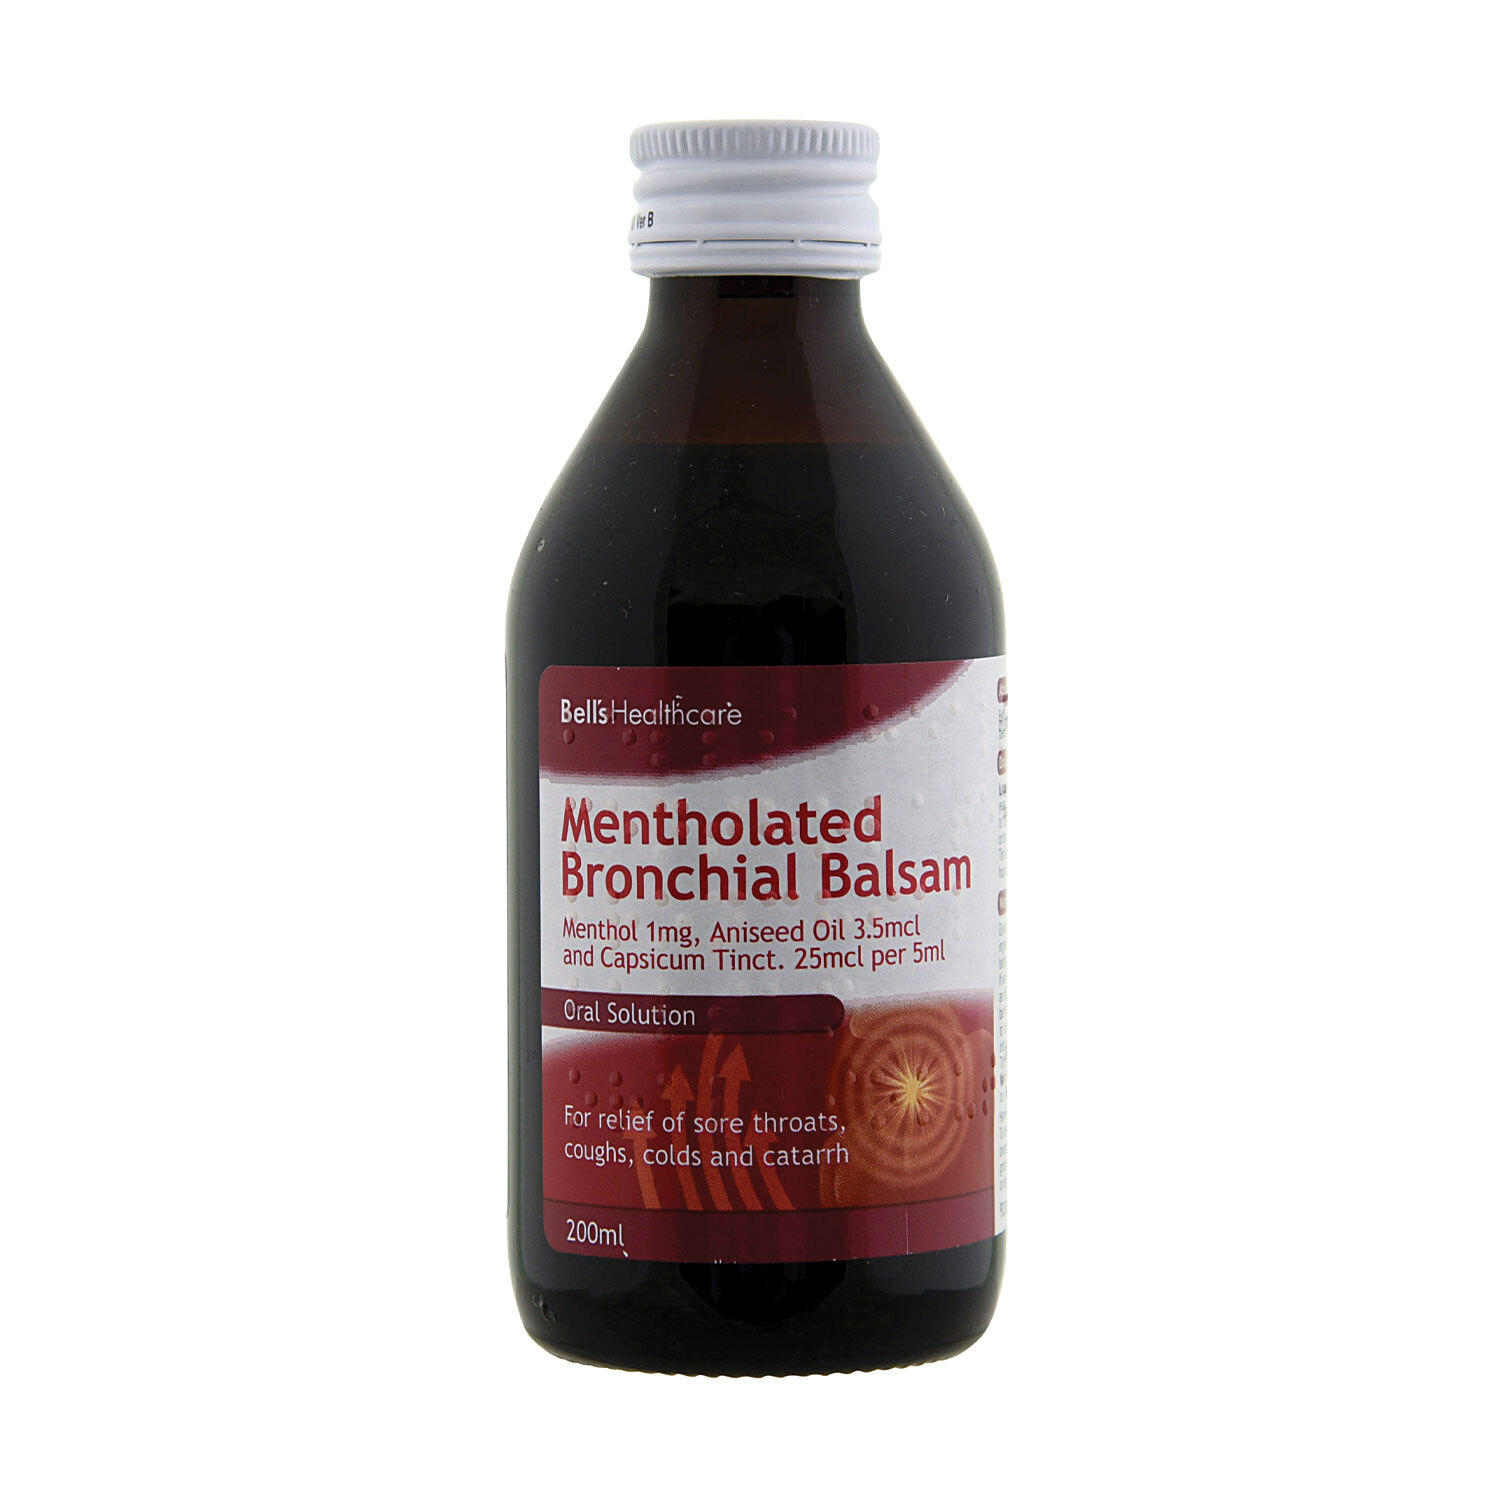 Bell's Healthcare Mentholated Bronchial Balsam Cough Syrup 200ml Image